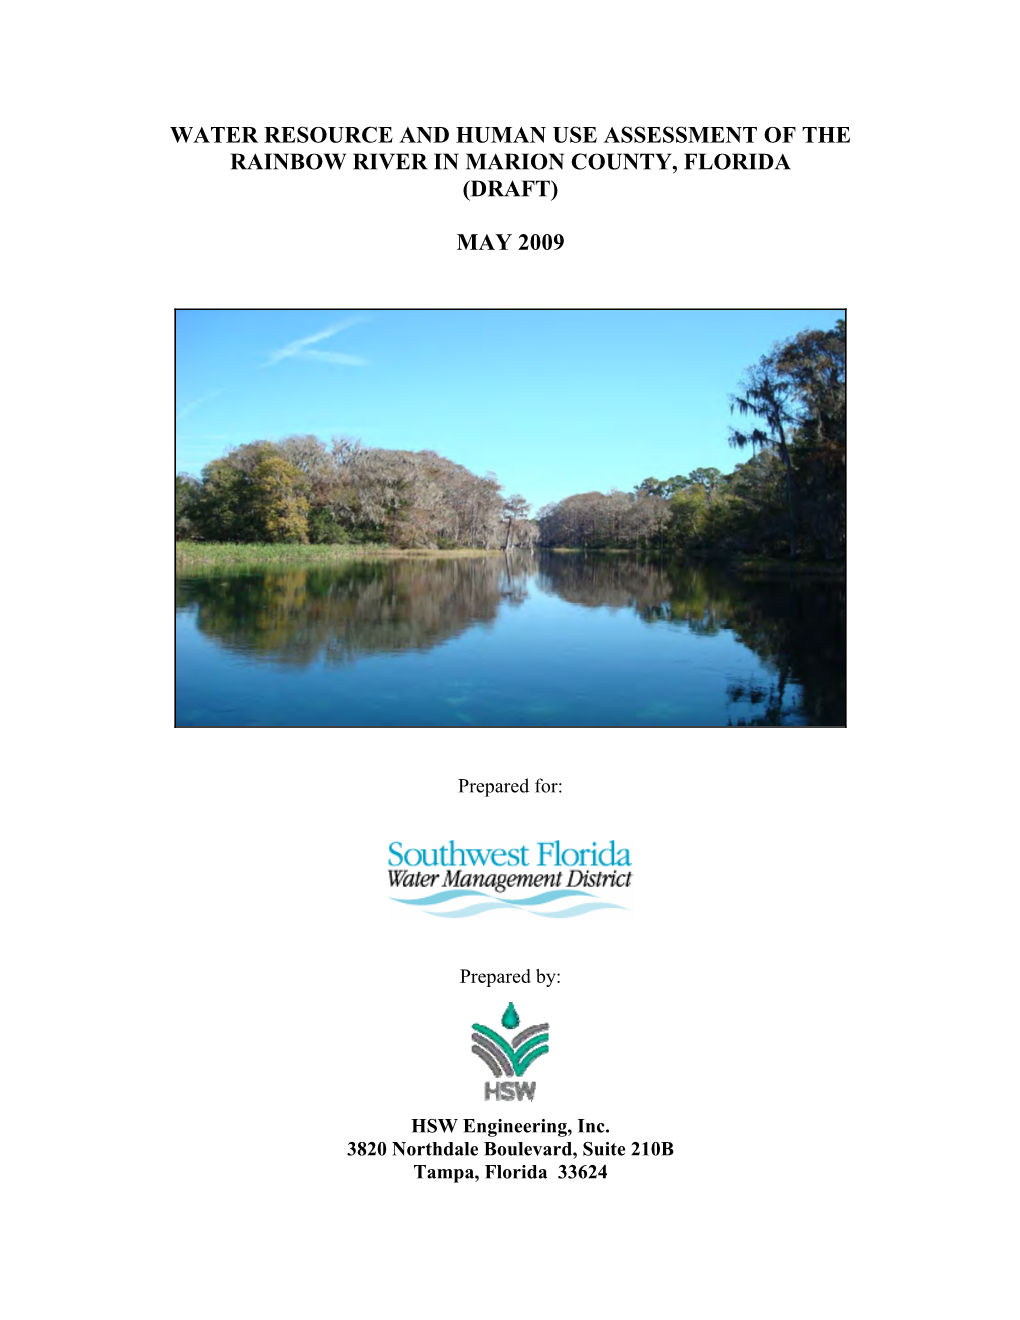 Water Resource and Human Use Assessment of the Rainbow River in Marion County, Florida (Draft)